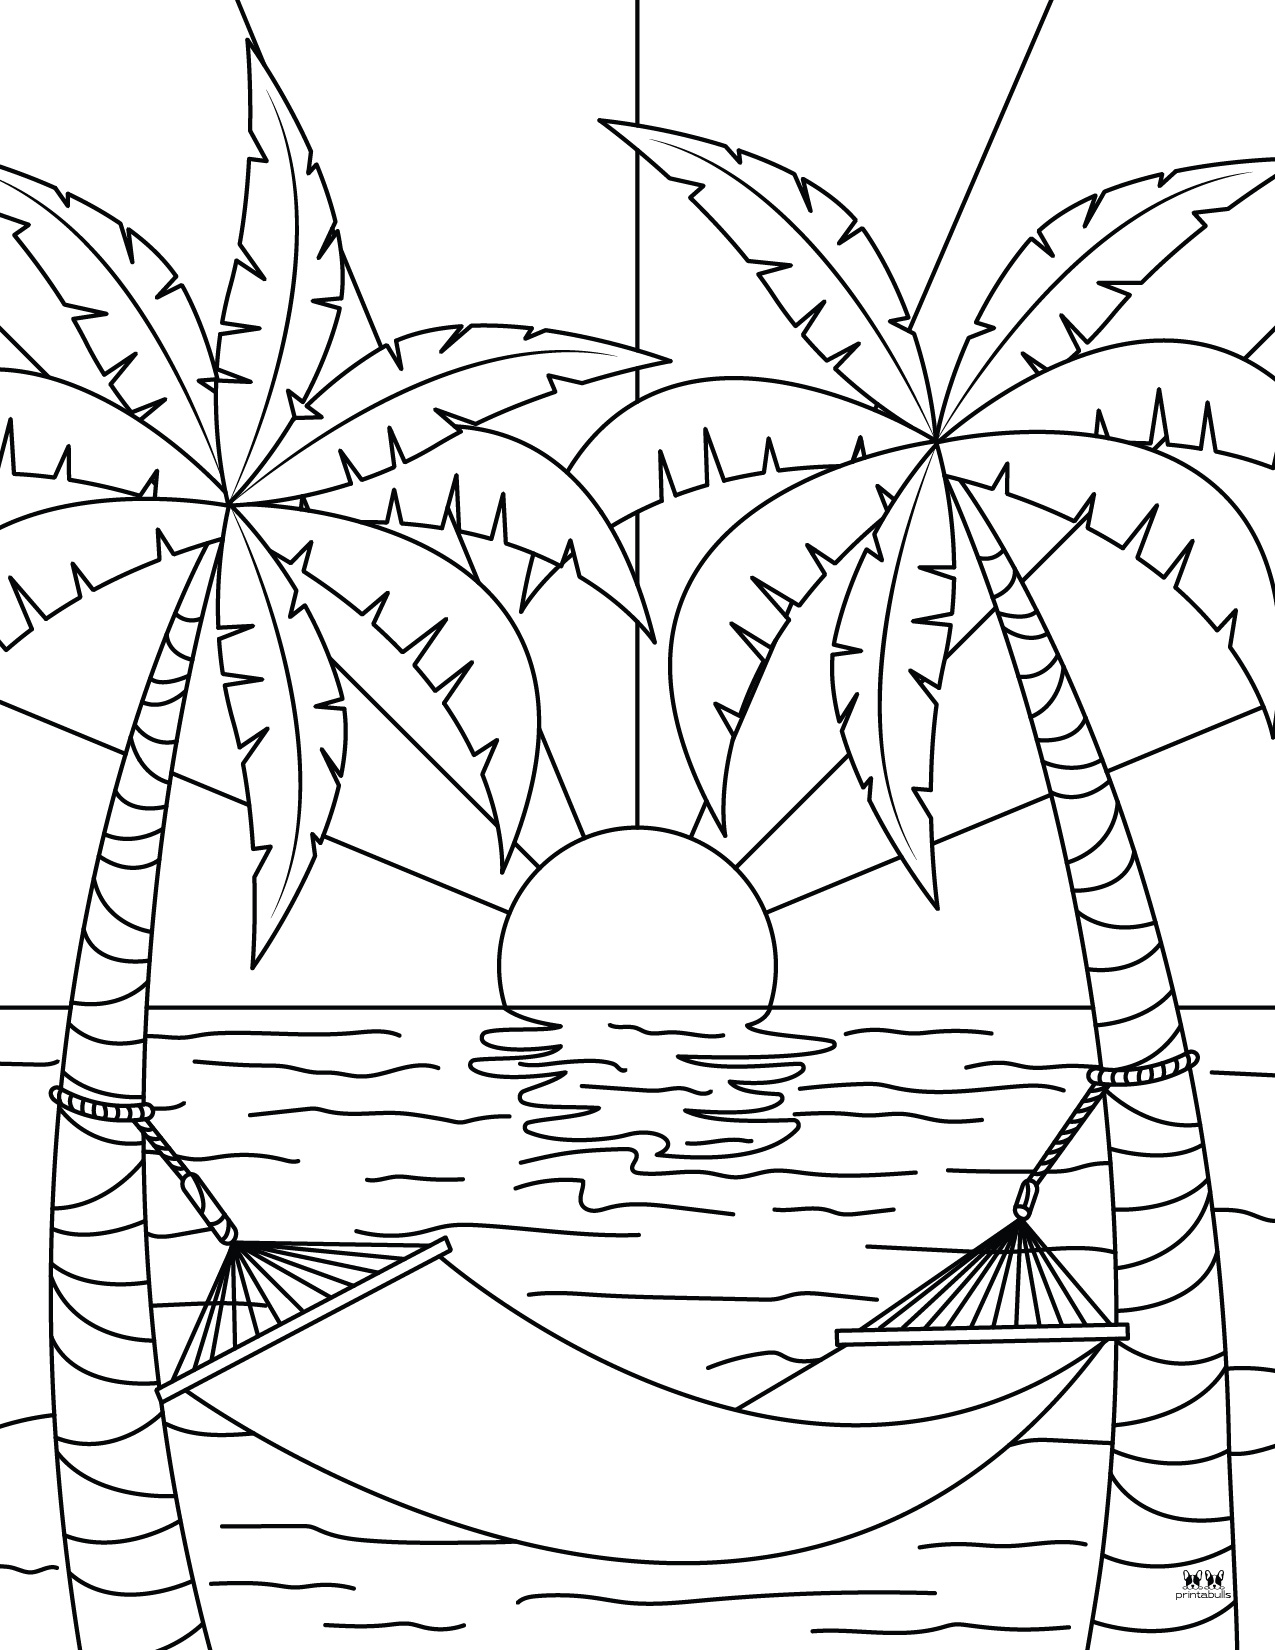 beach-coloring-pages-25-free-pages-printabulls